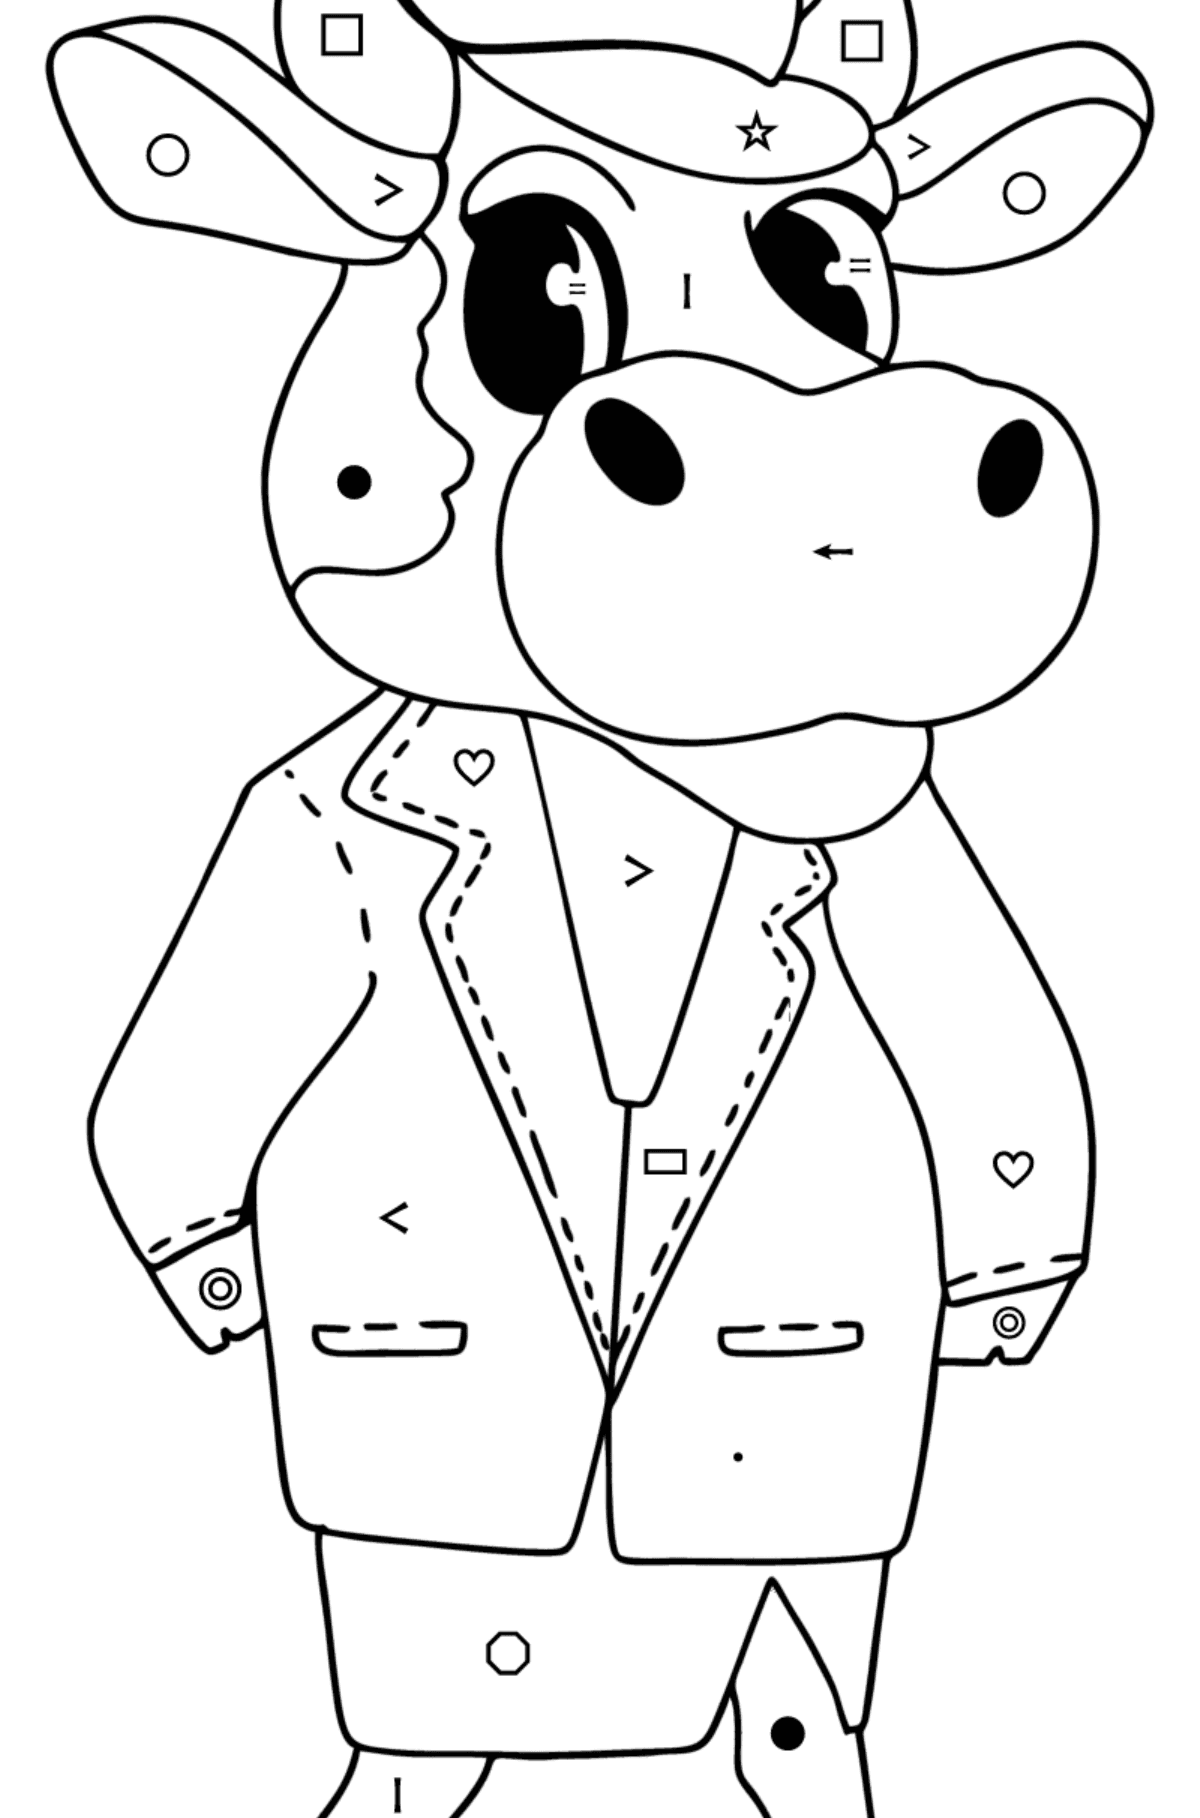 Cartoon cow coloring page - Coloring by Symbols and Geometric Shapes for Kids